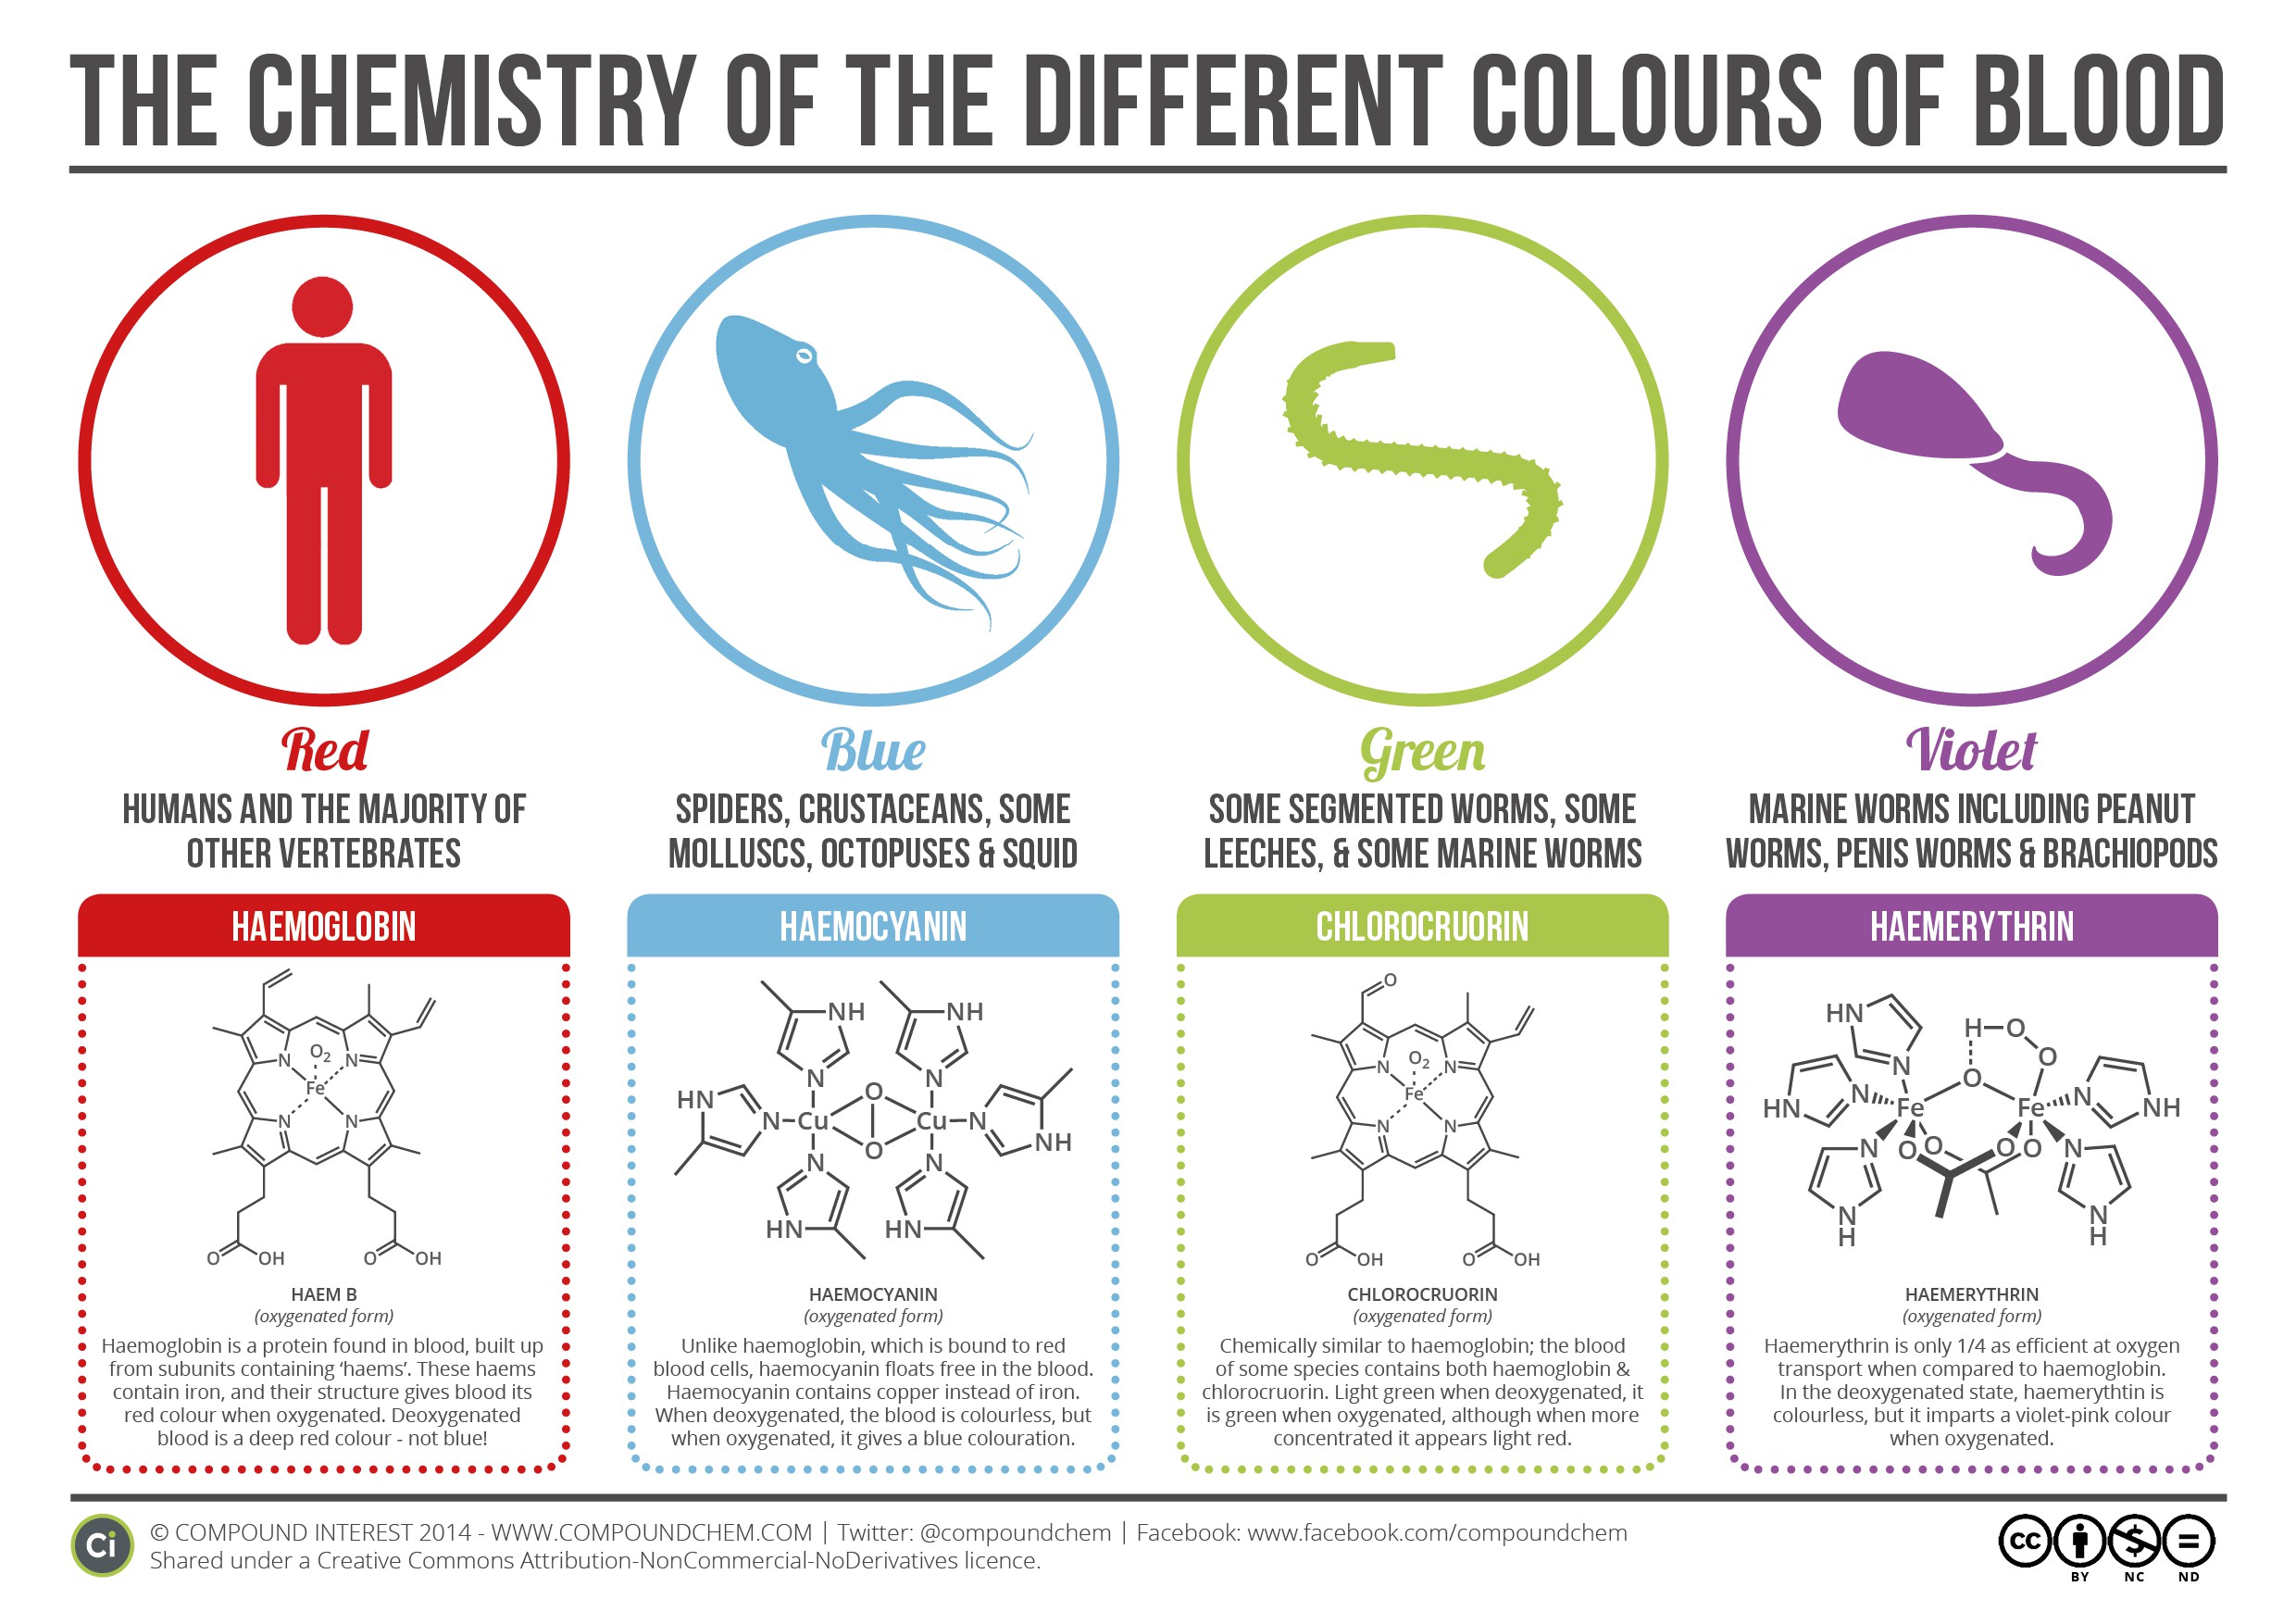 What Animals Have Different Colored Blood